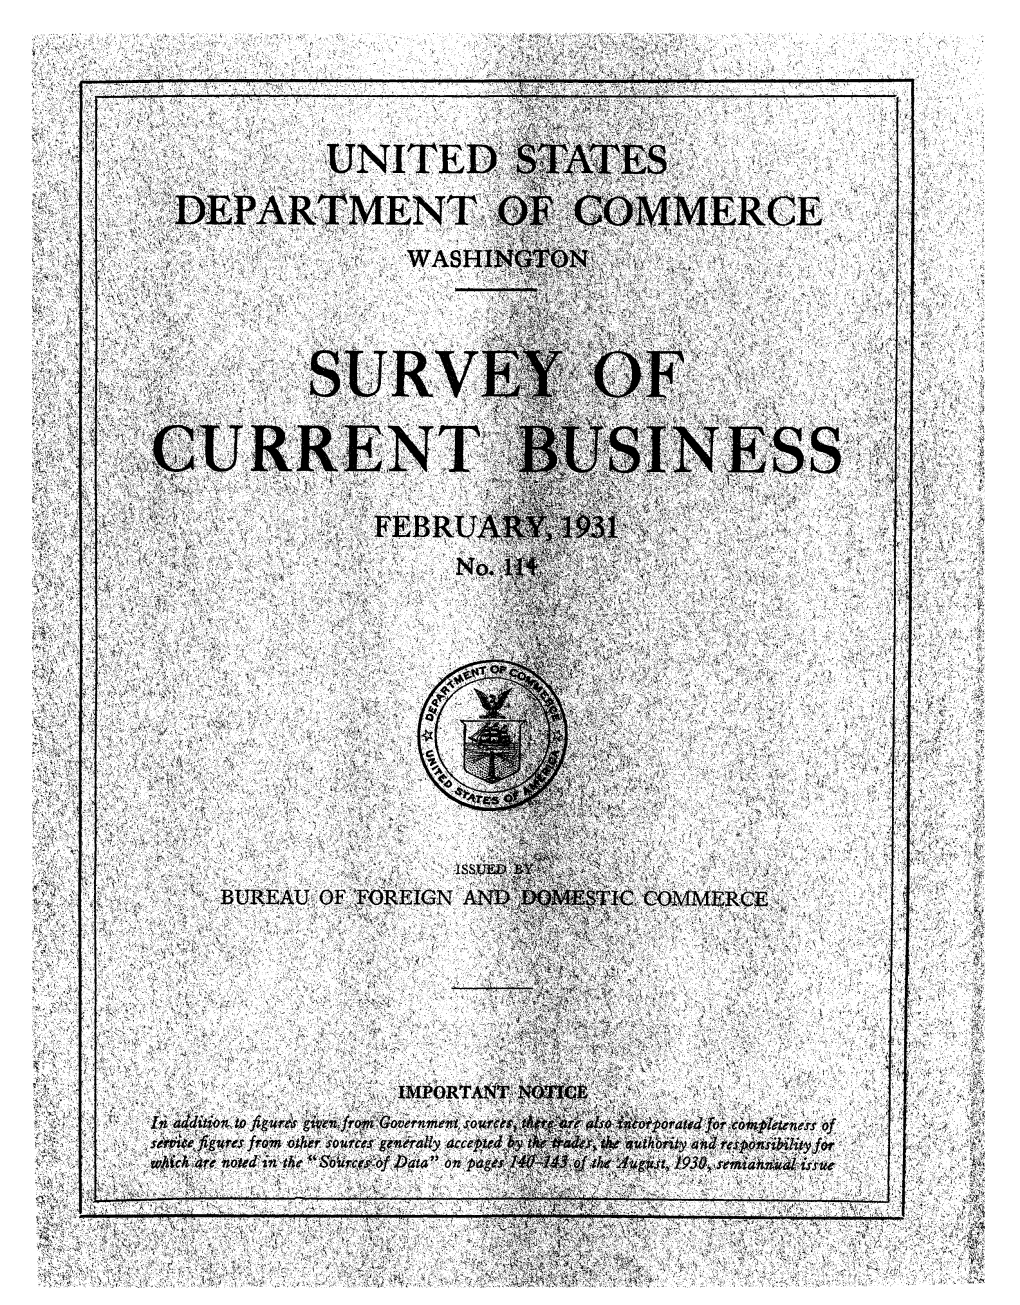 Survey of Current Business February 1931